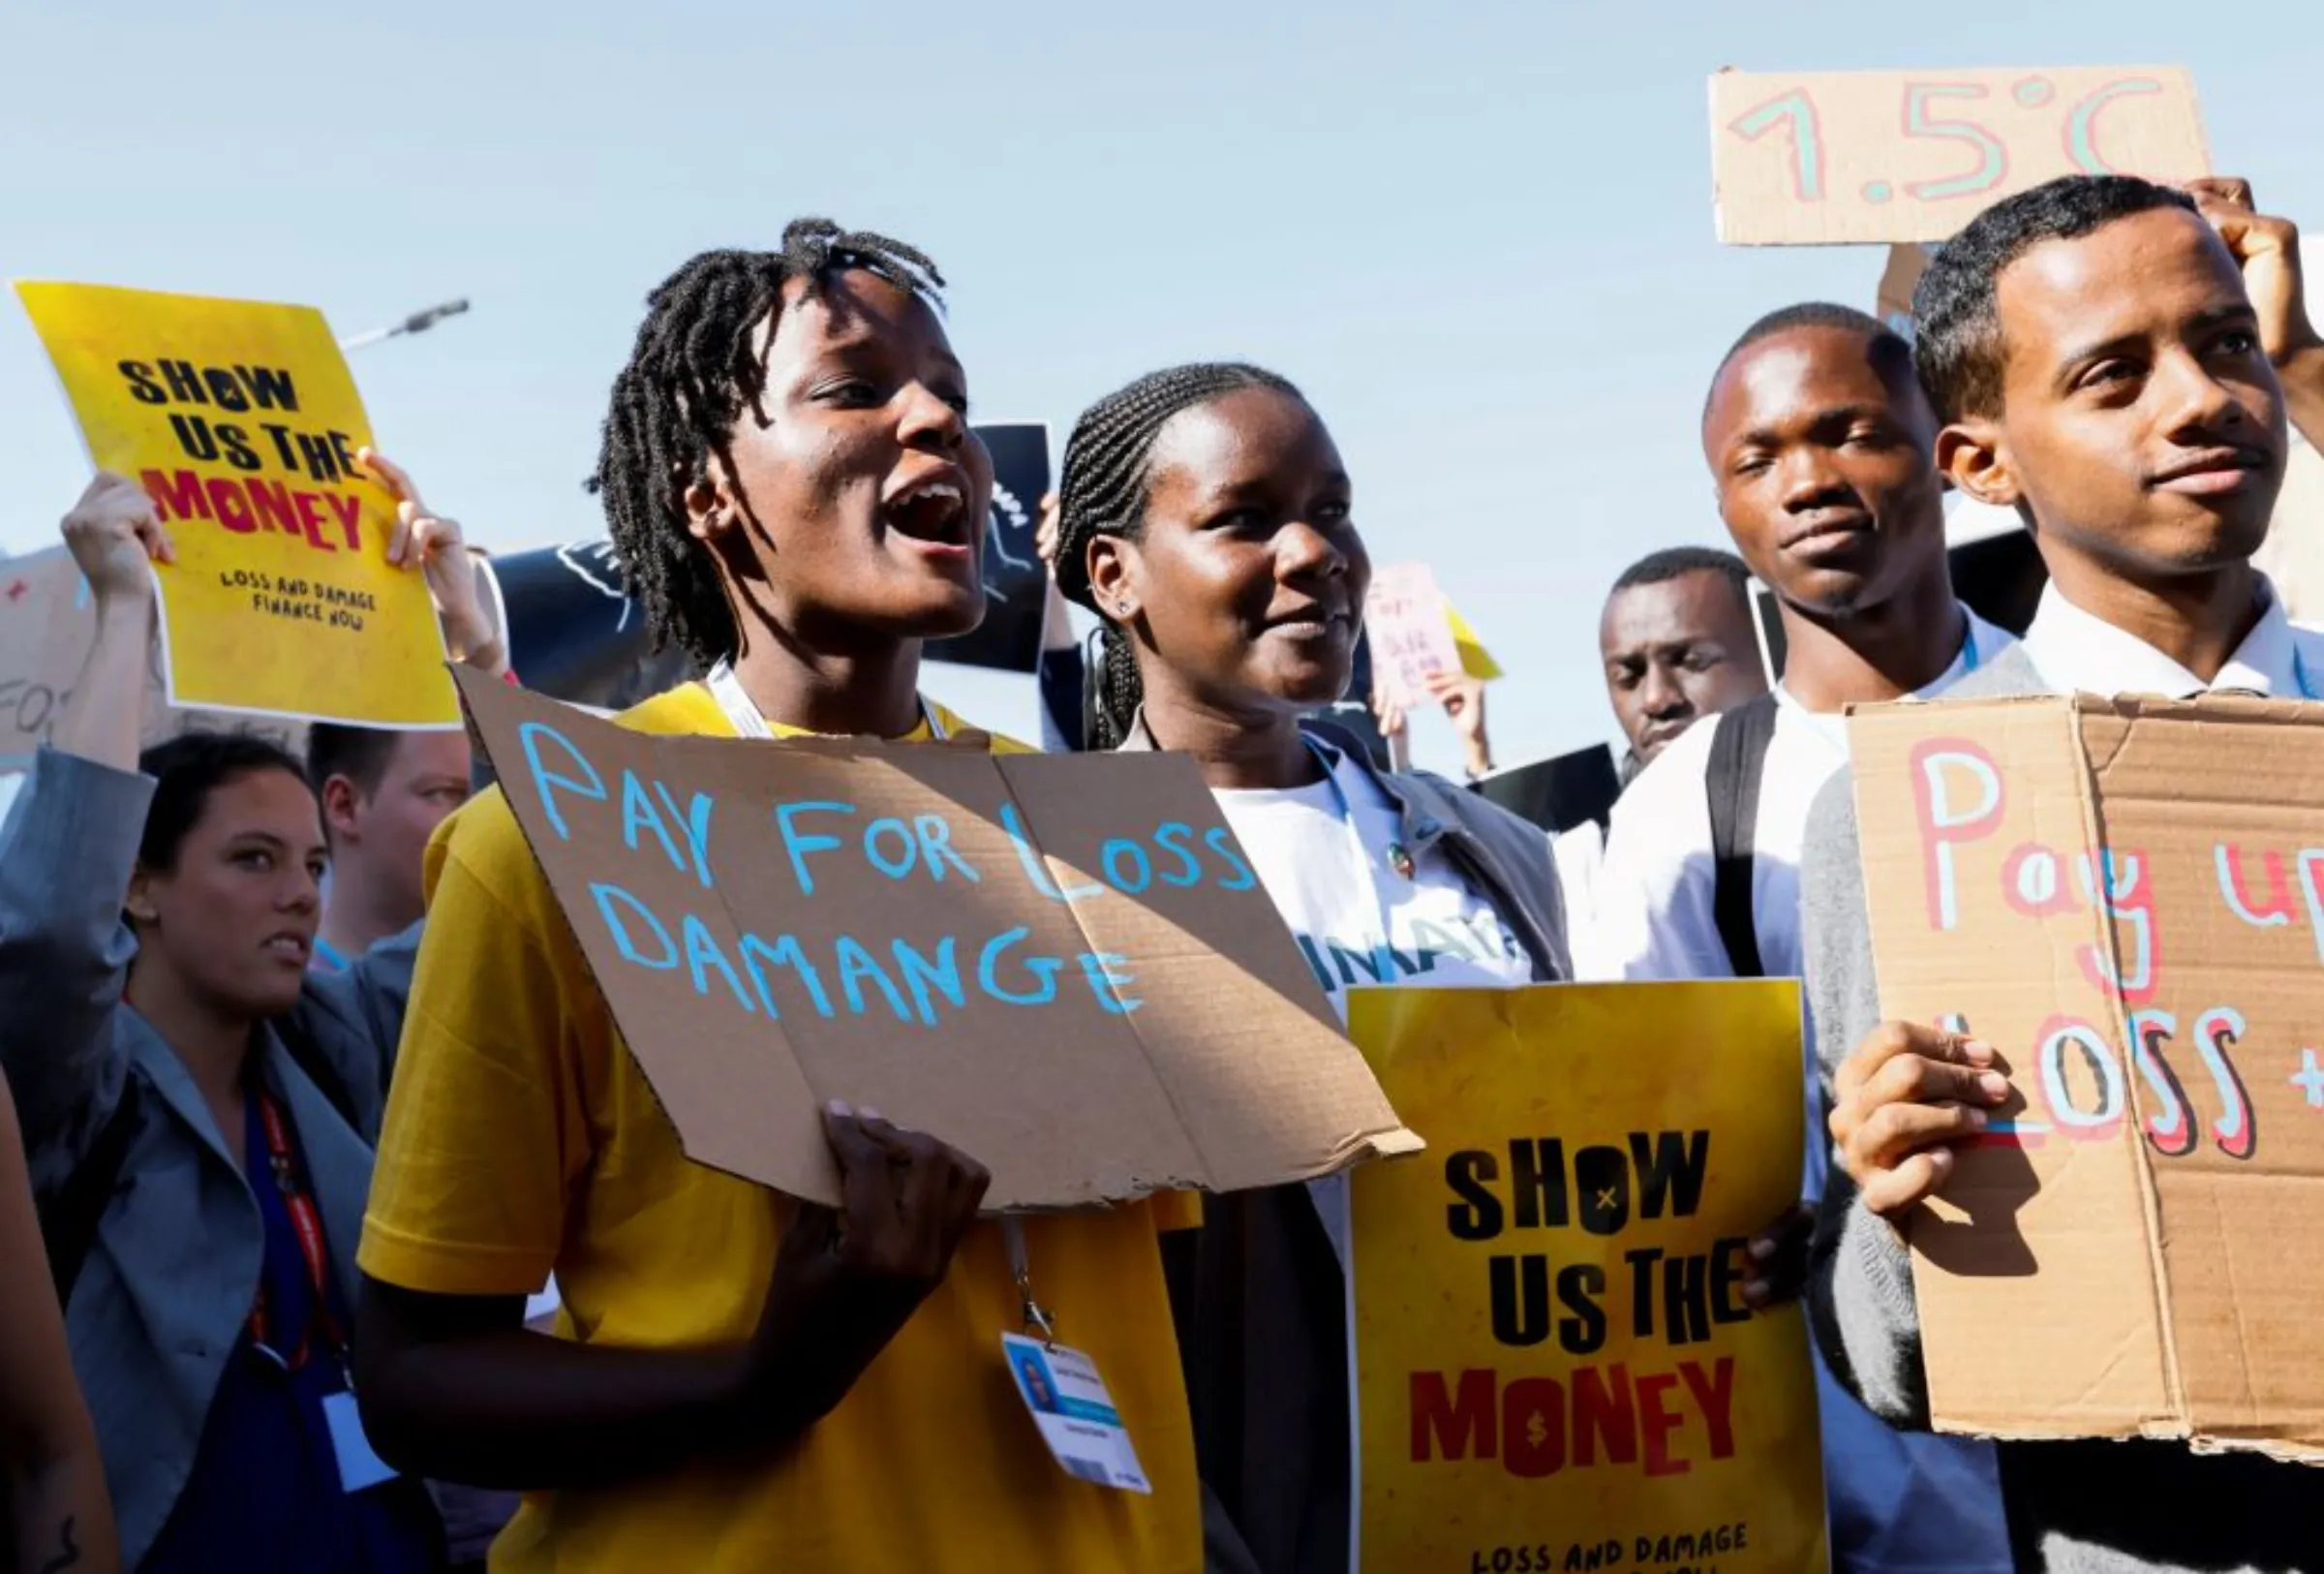 Ugandan climate activist Vanessa Nakate takes part in the Fridays for Future strike alongside other international climate activists during the COP27 climate summit, in Sharm el-Sheikh, Egypt, November 11, 2022.REUTERS/Emilie Madi